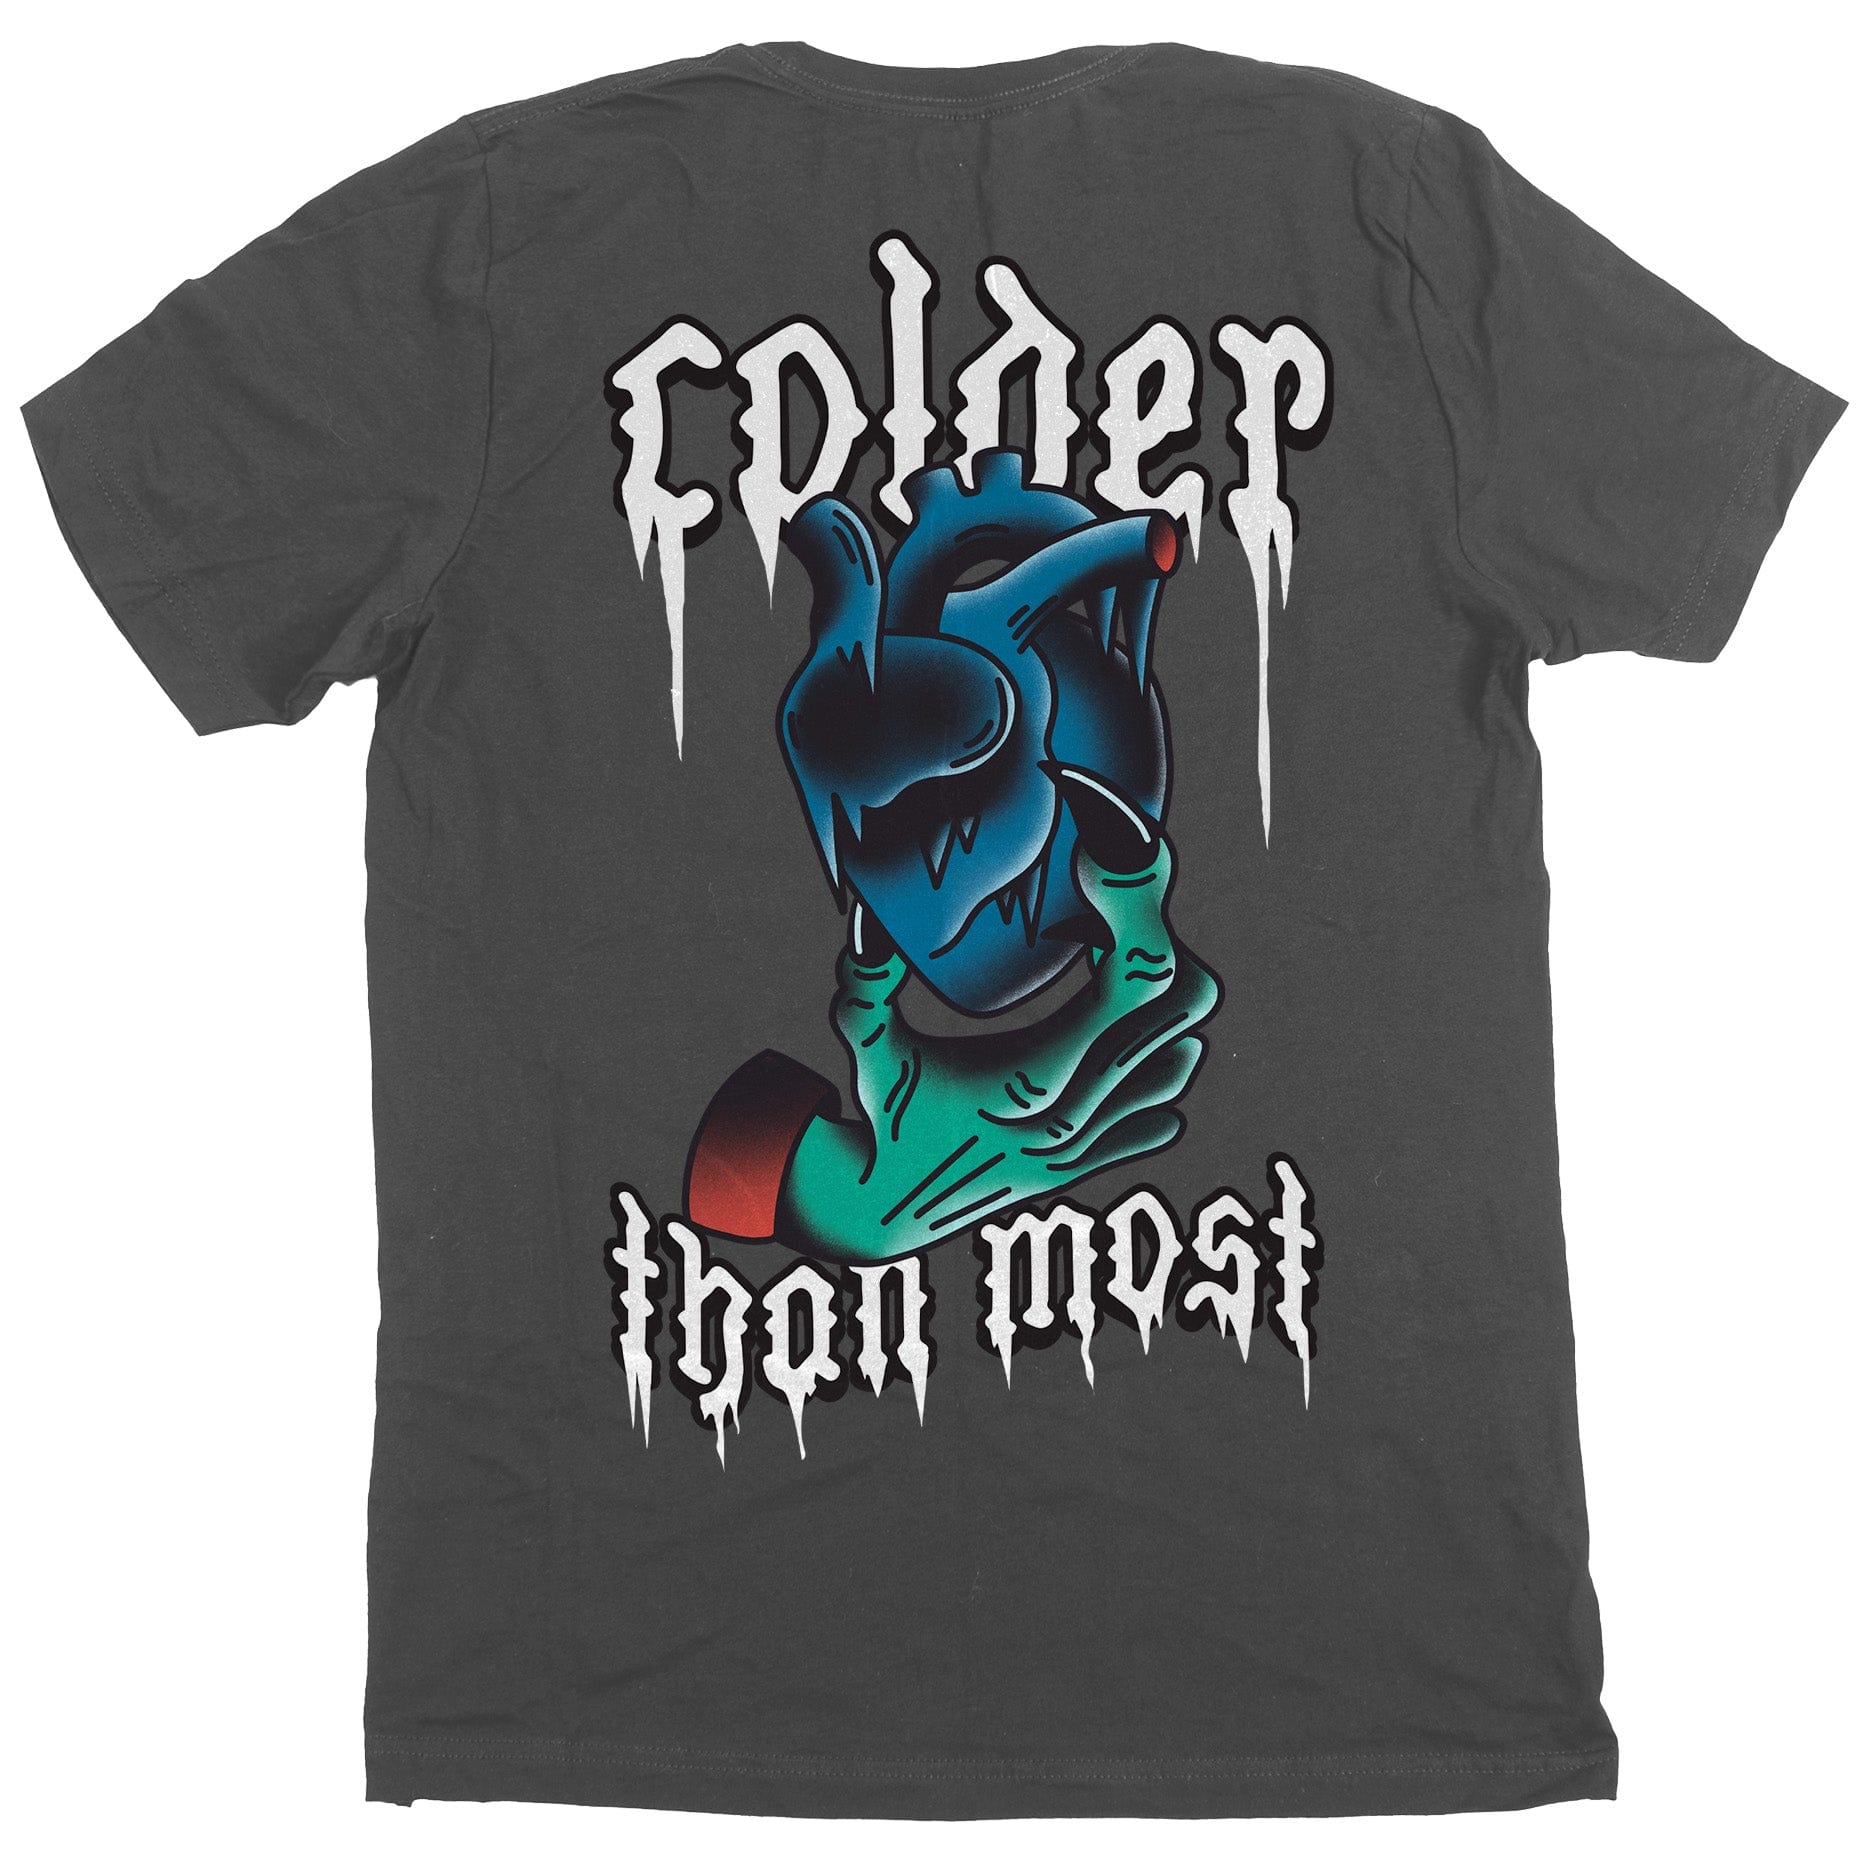 Image of Colder Than Most Tee